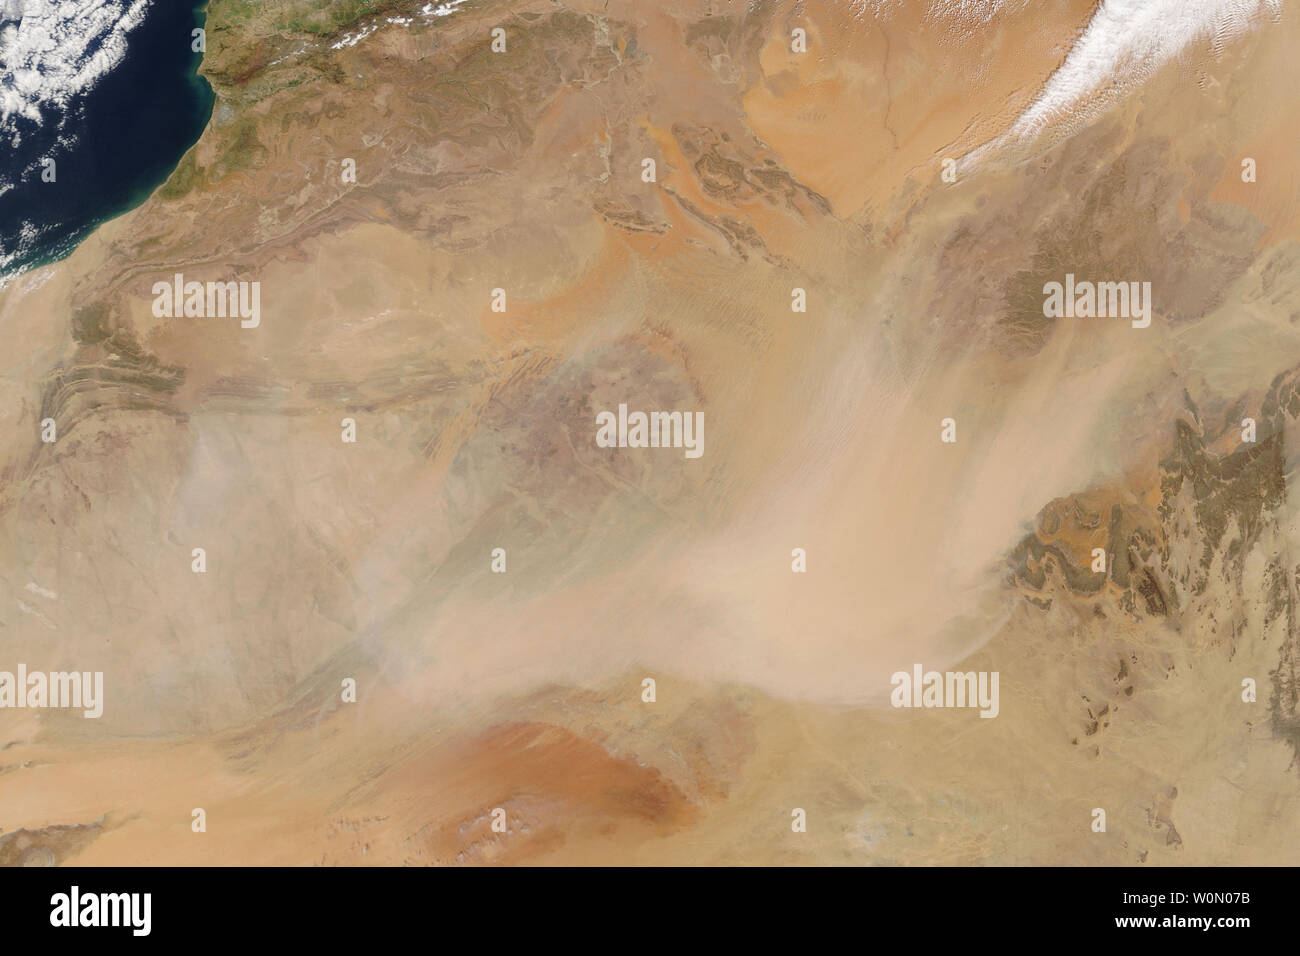 In late March 2018, North Africa endured a maelstrom of sand, with far-reaching effects. Dust from the Sahara spread north into Europe last week, coating ski slopes and Mediterranean cities in orange particles. Though there is often some amount of dust being blown around in North Africa, recent activity appeared to pick up (as viewed by satellite) on March 21, 2018, when the Moderate Resolution Imaging Spectroradiometer (MODIS) on NASA's Terra satellite acquired this image. Even by the standards of the desert interior of Africa, the storms of late March have been intense. Schools and airports Stock Photo